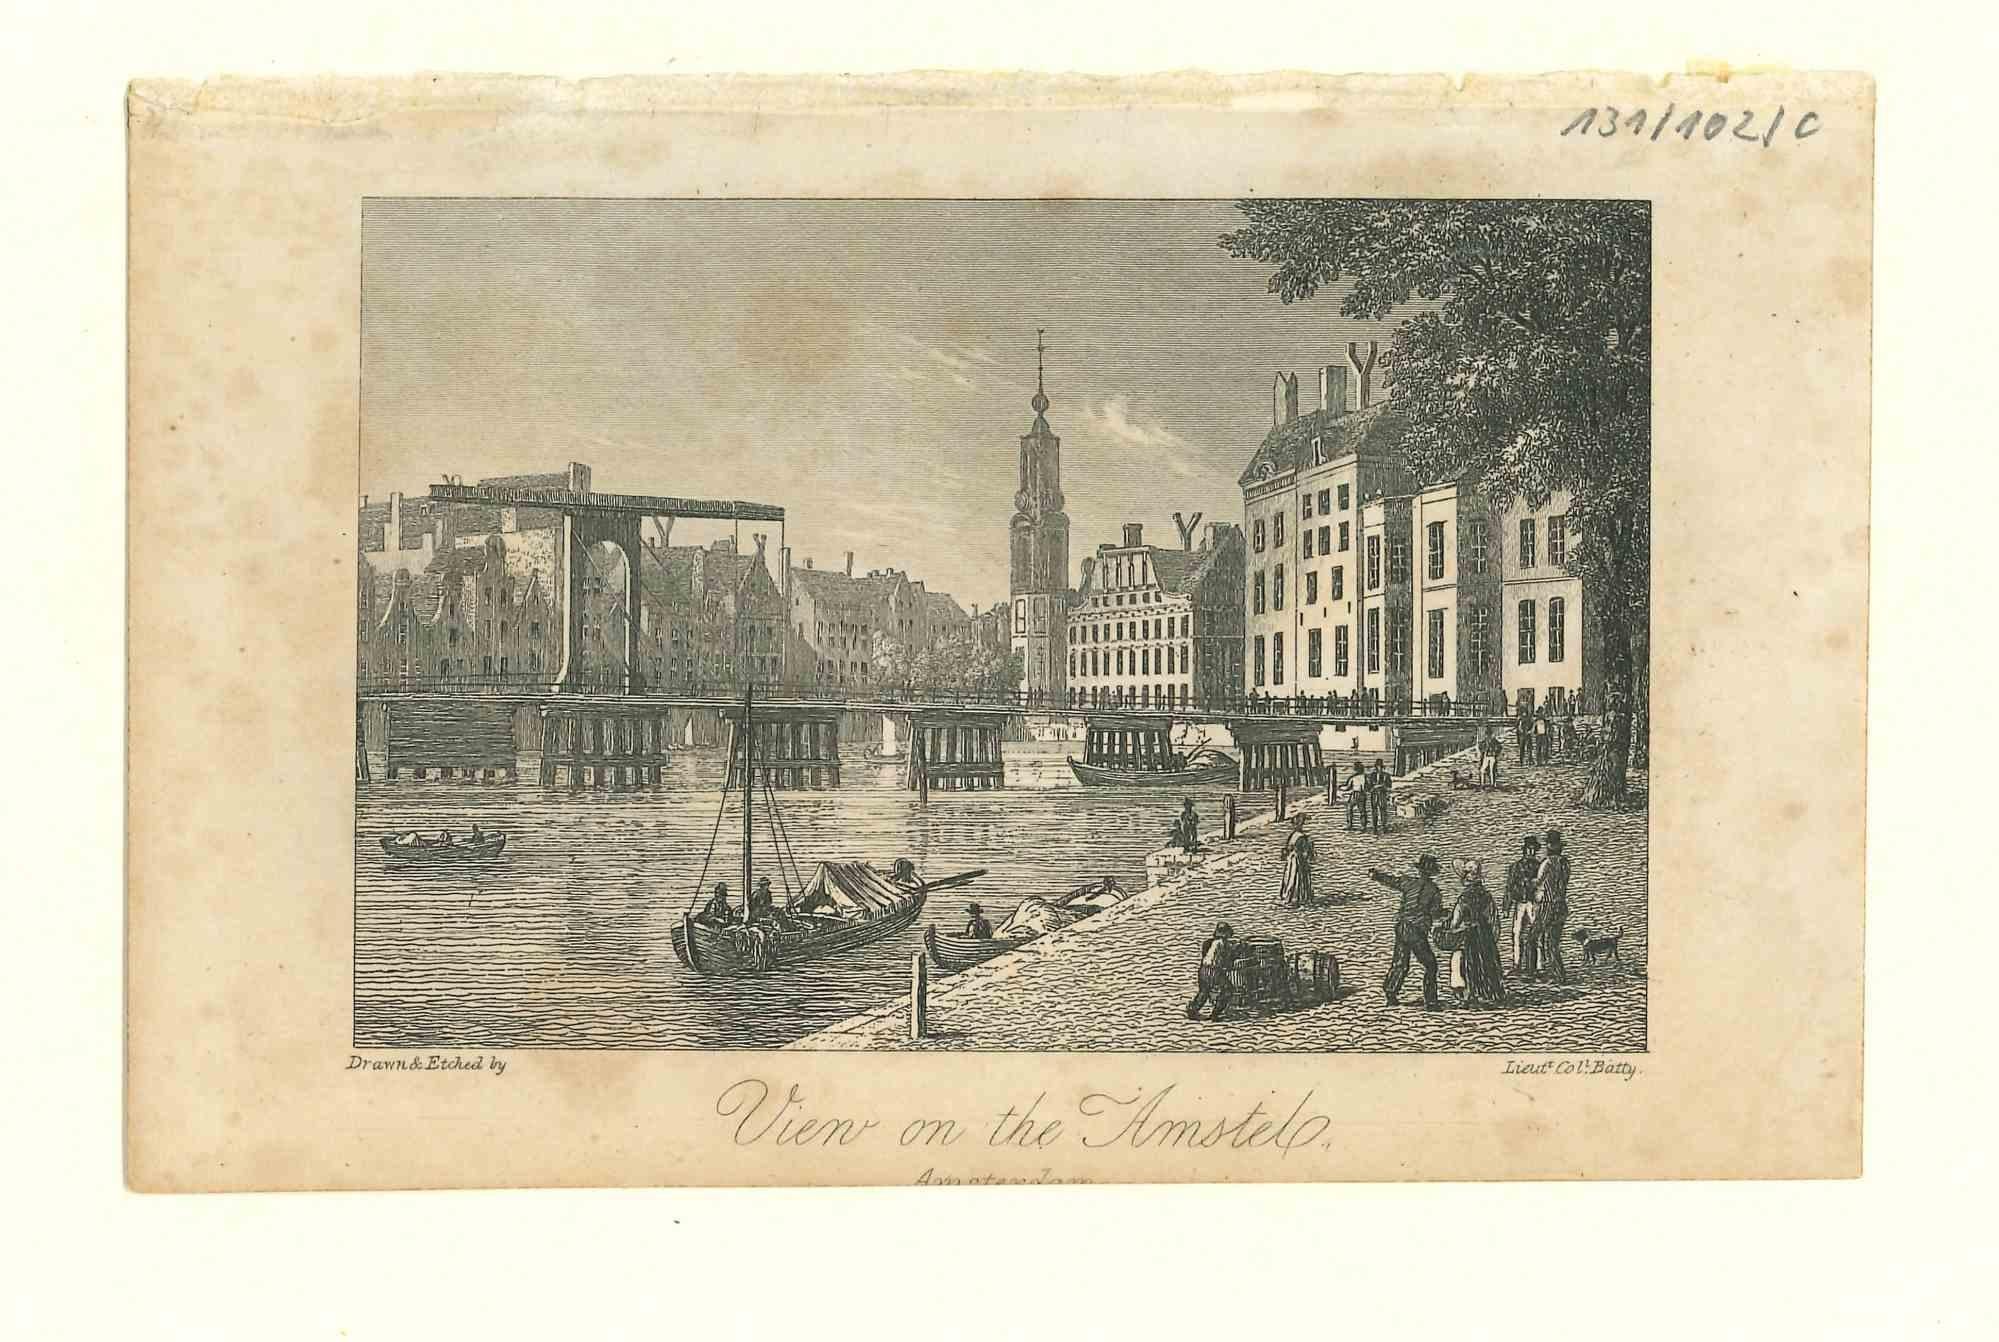 Unknown Figurative Print - Ancient View of View on the Amstel - Original lithograph - Mid-19th Century